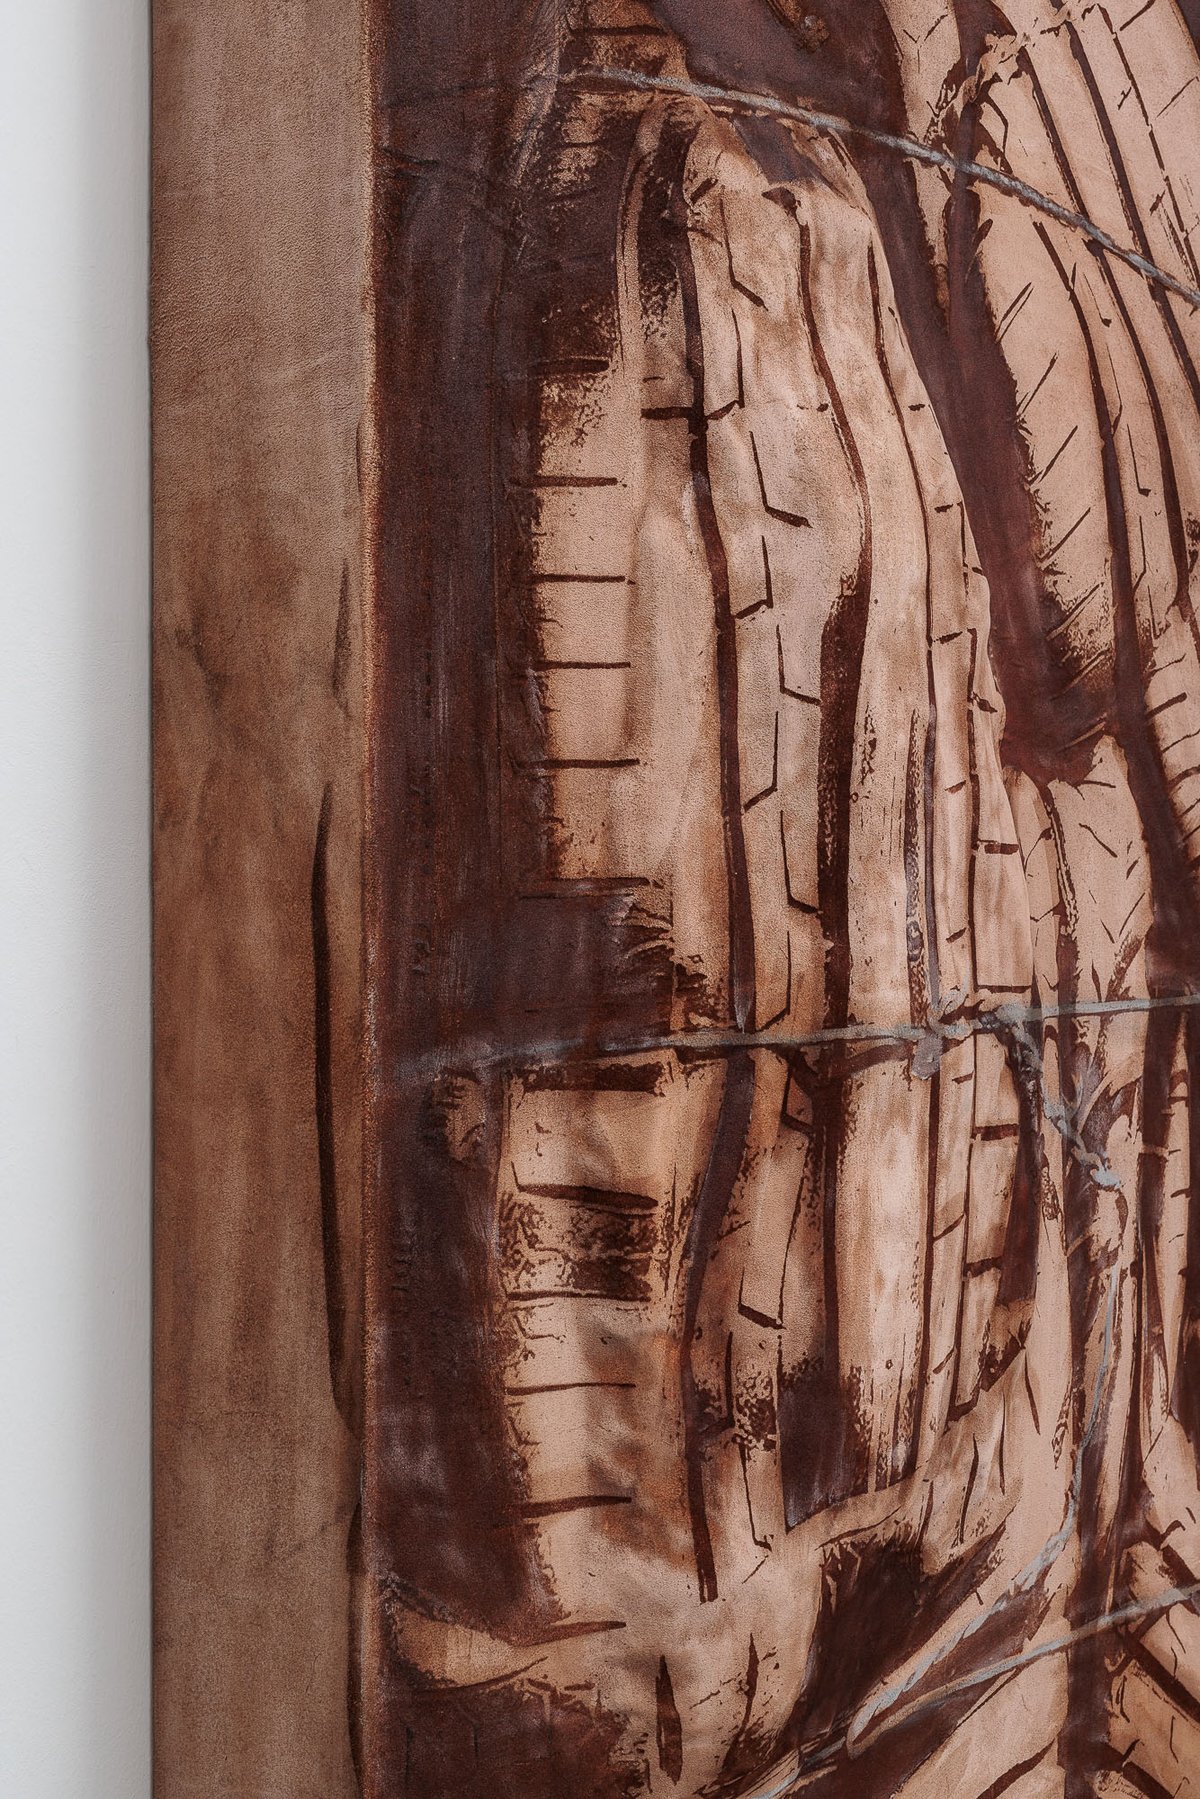 Lena HenkeCombustions 21 [Tyre bulge], 2024Laser etched leather, pigment on wooden panel150 x 125 x 15 cm